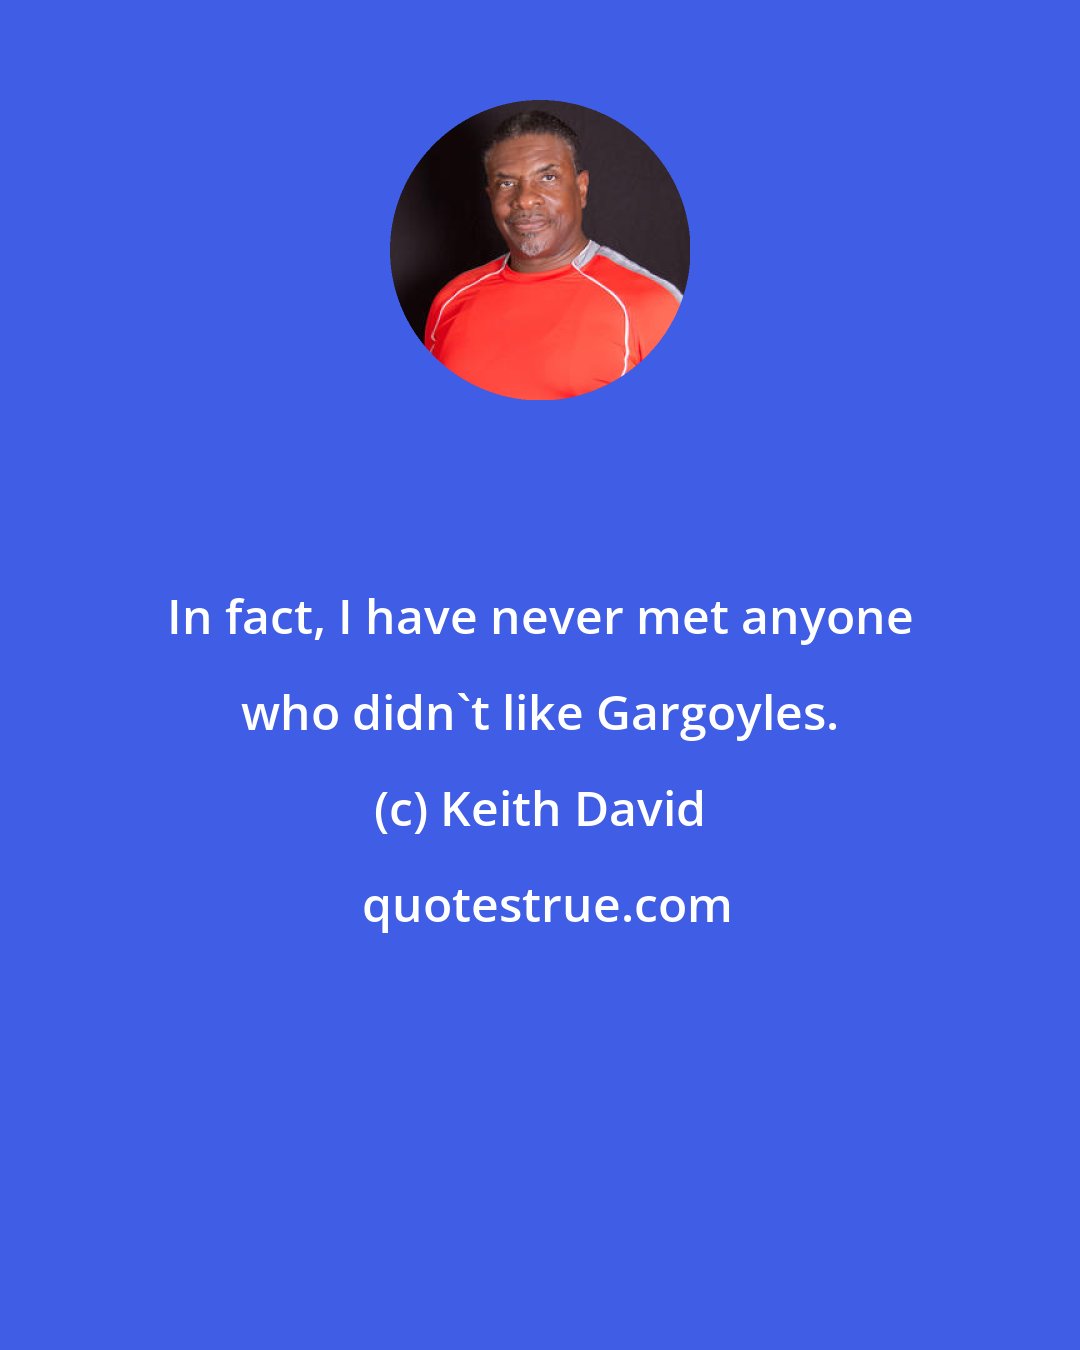 Keith David: In fact, I have never met anyone who didn't like Gargoyles.